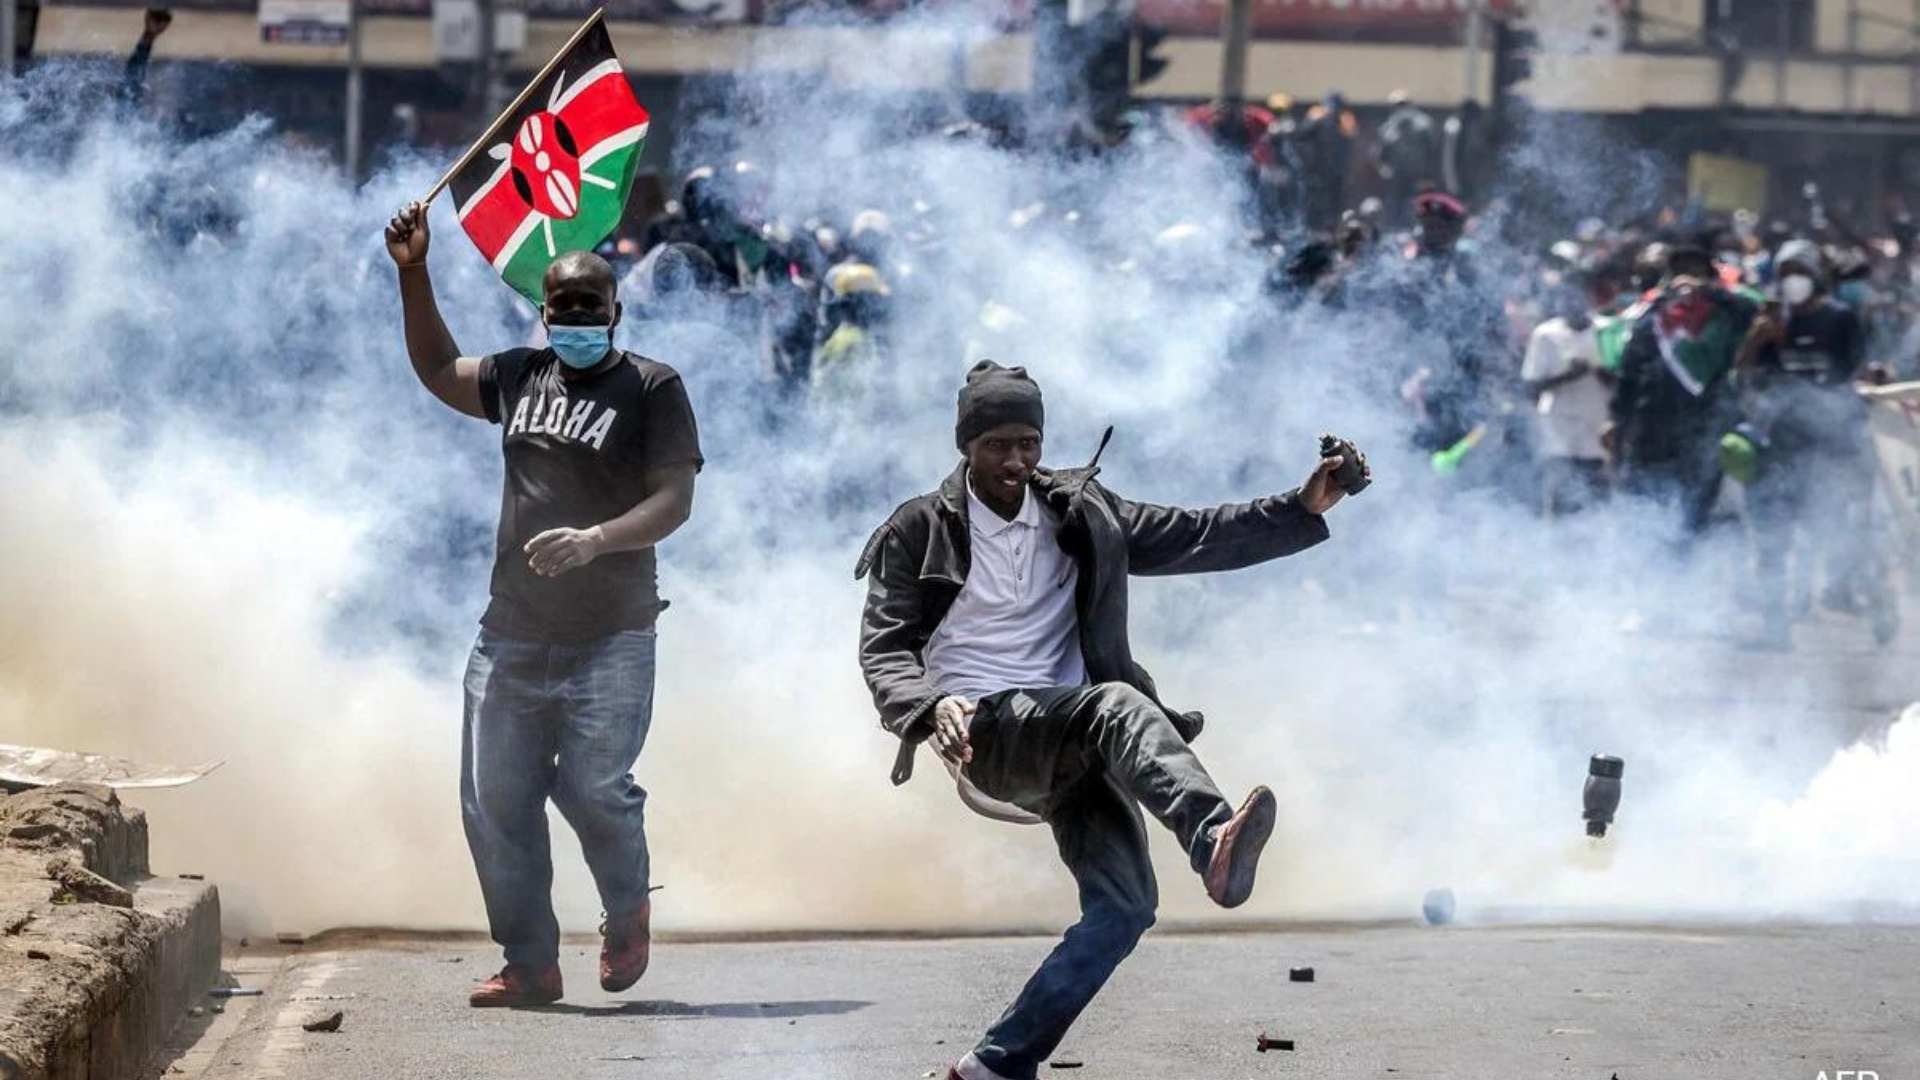 Kenya Protest: 1 Dead, Parliament On Fire As Protests Continue